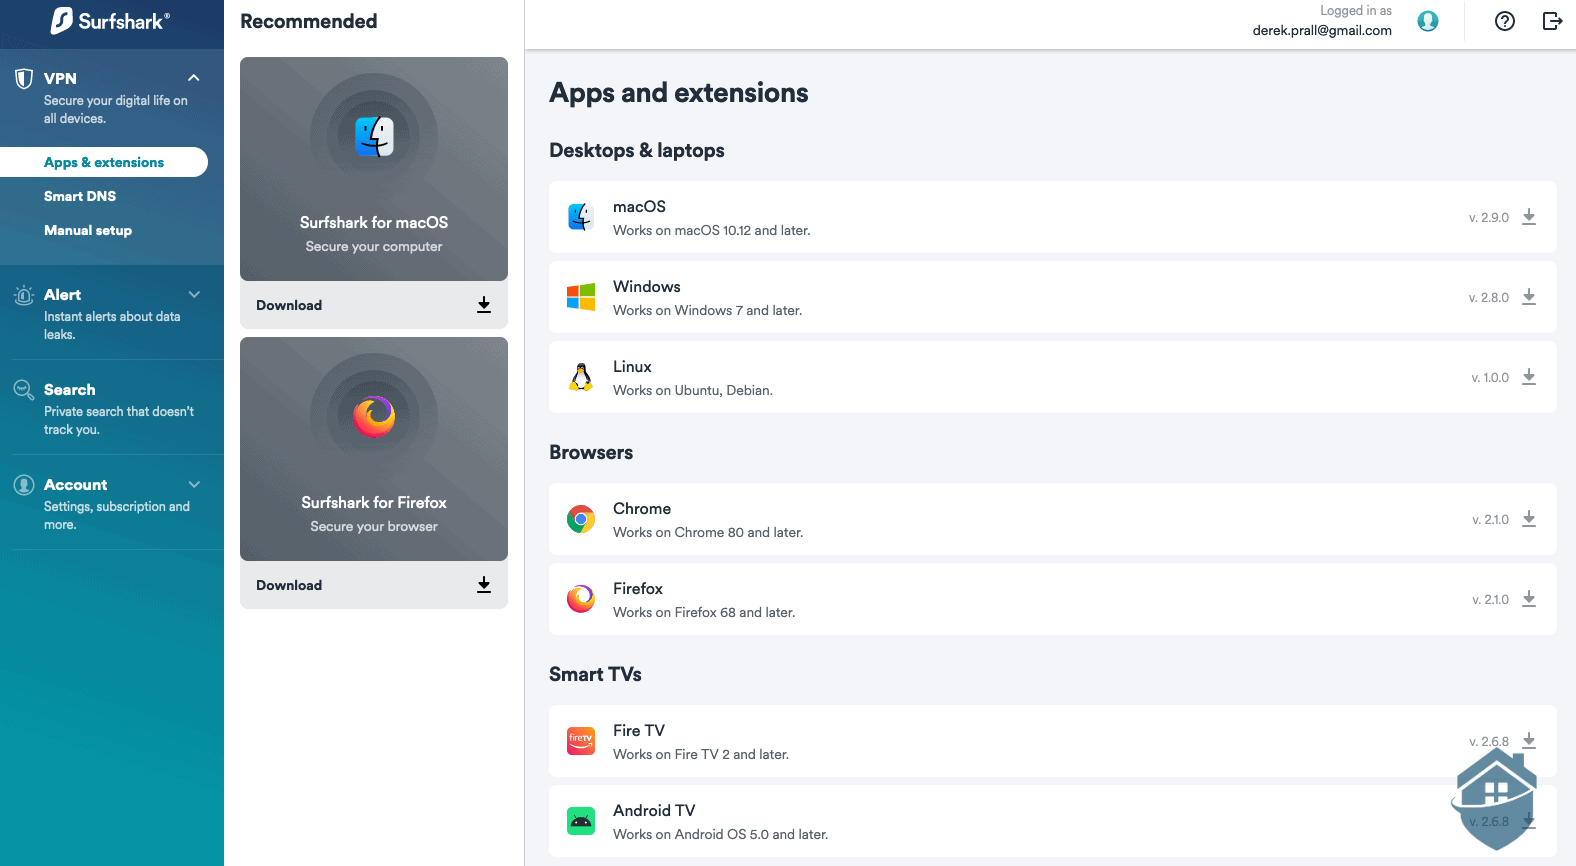 Surfshark Apps and Extensions